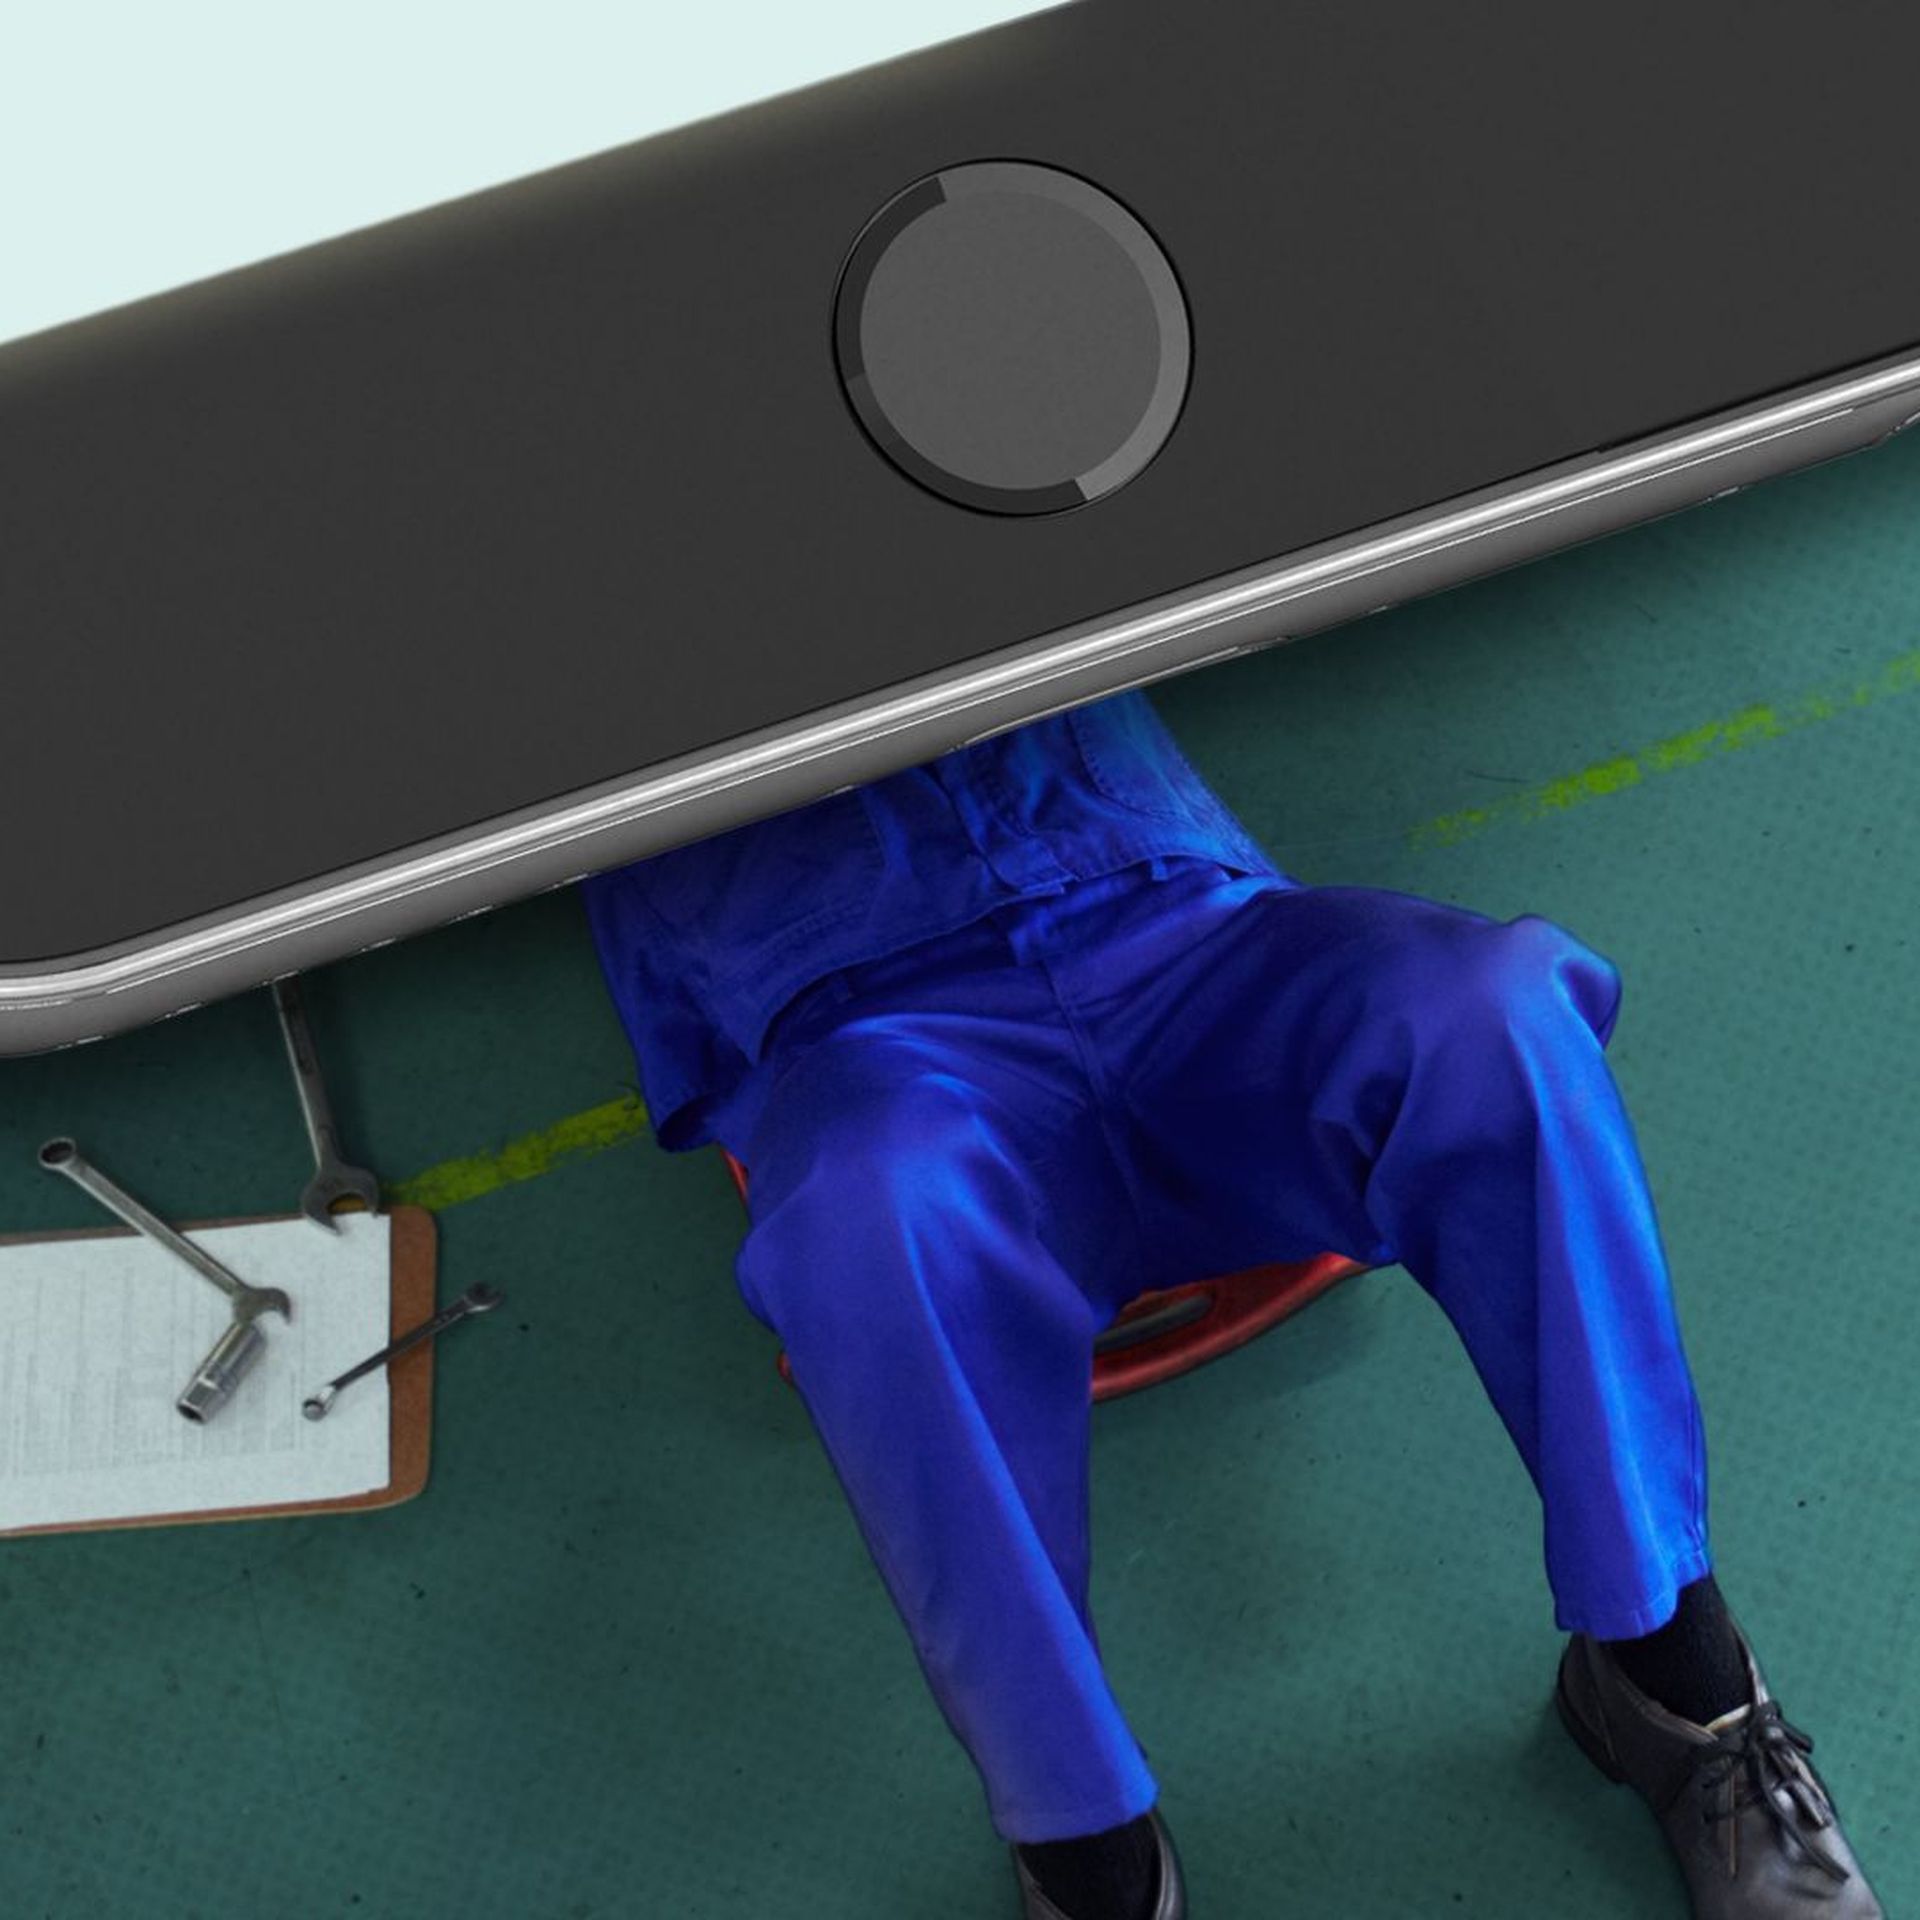 An illustration of a person working under a large iPhone the size of a car.